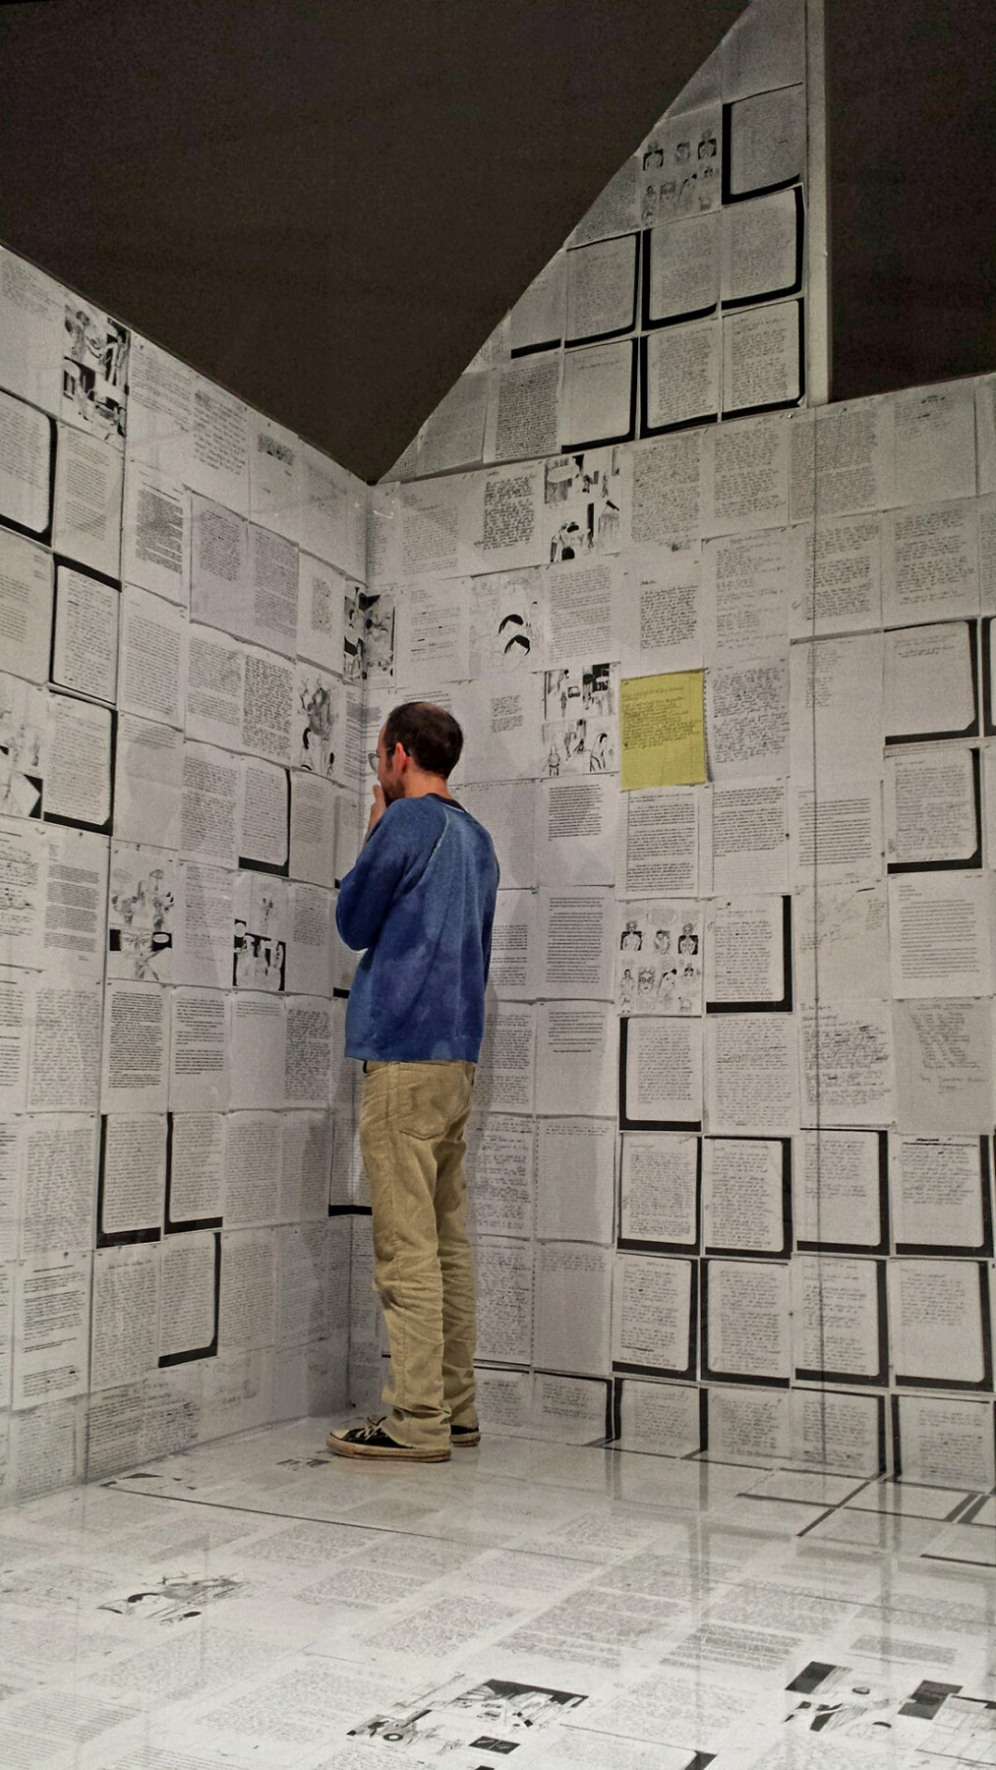 Installation view of "The Writing on the Wall"